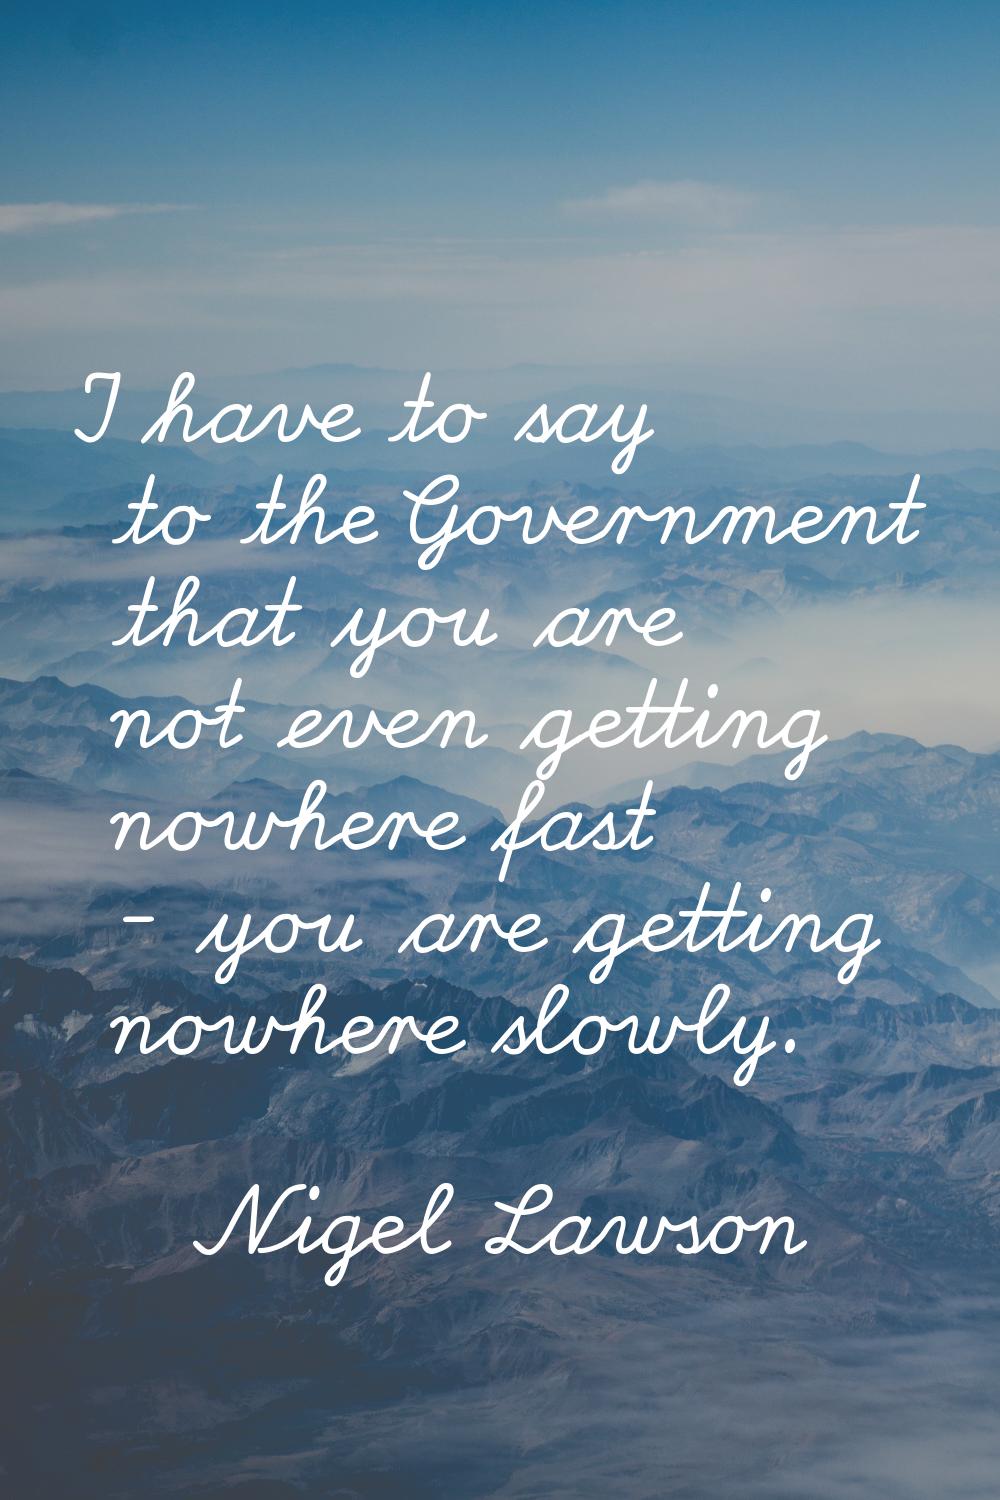 I have to say to the Government that you are not even getting nowhere fast - you are getting nowher